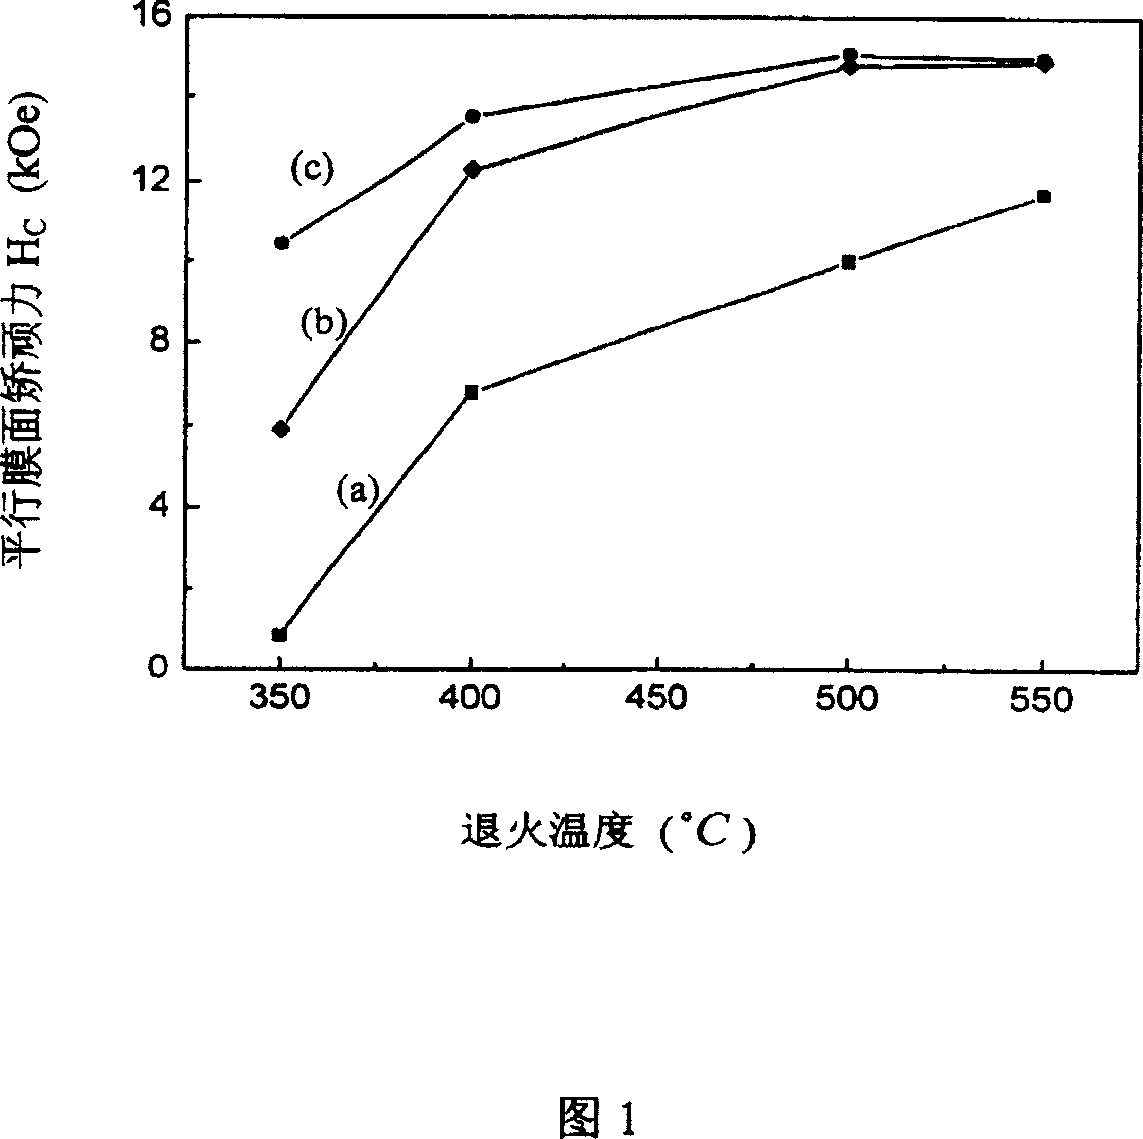 Method for improving L10-Fept thin film performance with surface activating agent